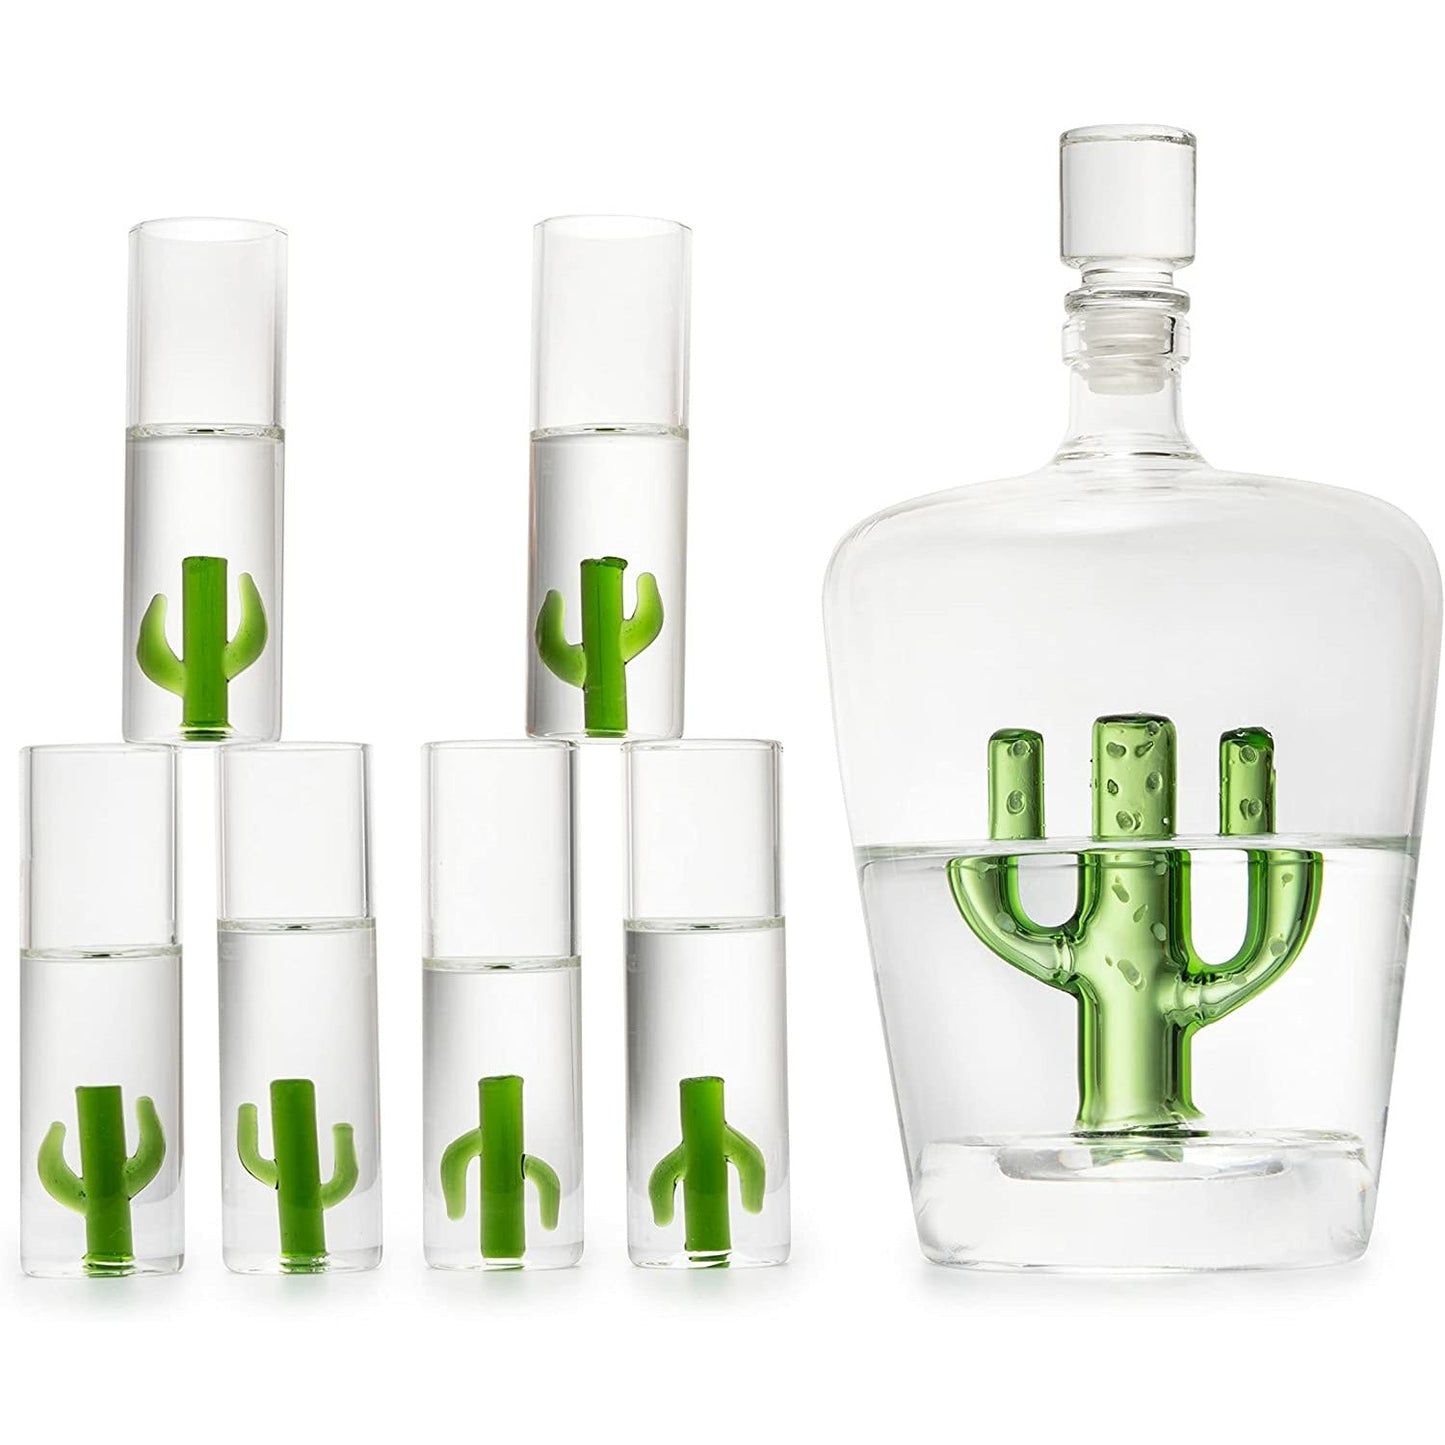 Tequila Decanter Set With Agave Decanter and 6 Agave Shot Glasses, Perfect For Any Bar Or Tequila Party, 25 Ounce Bottle, 3 Ounce Tequila Shot Glasses (Cactus Tequila Set)-0